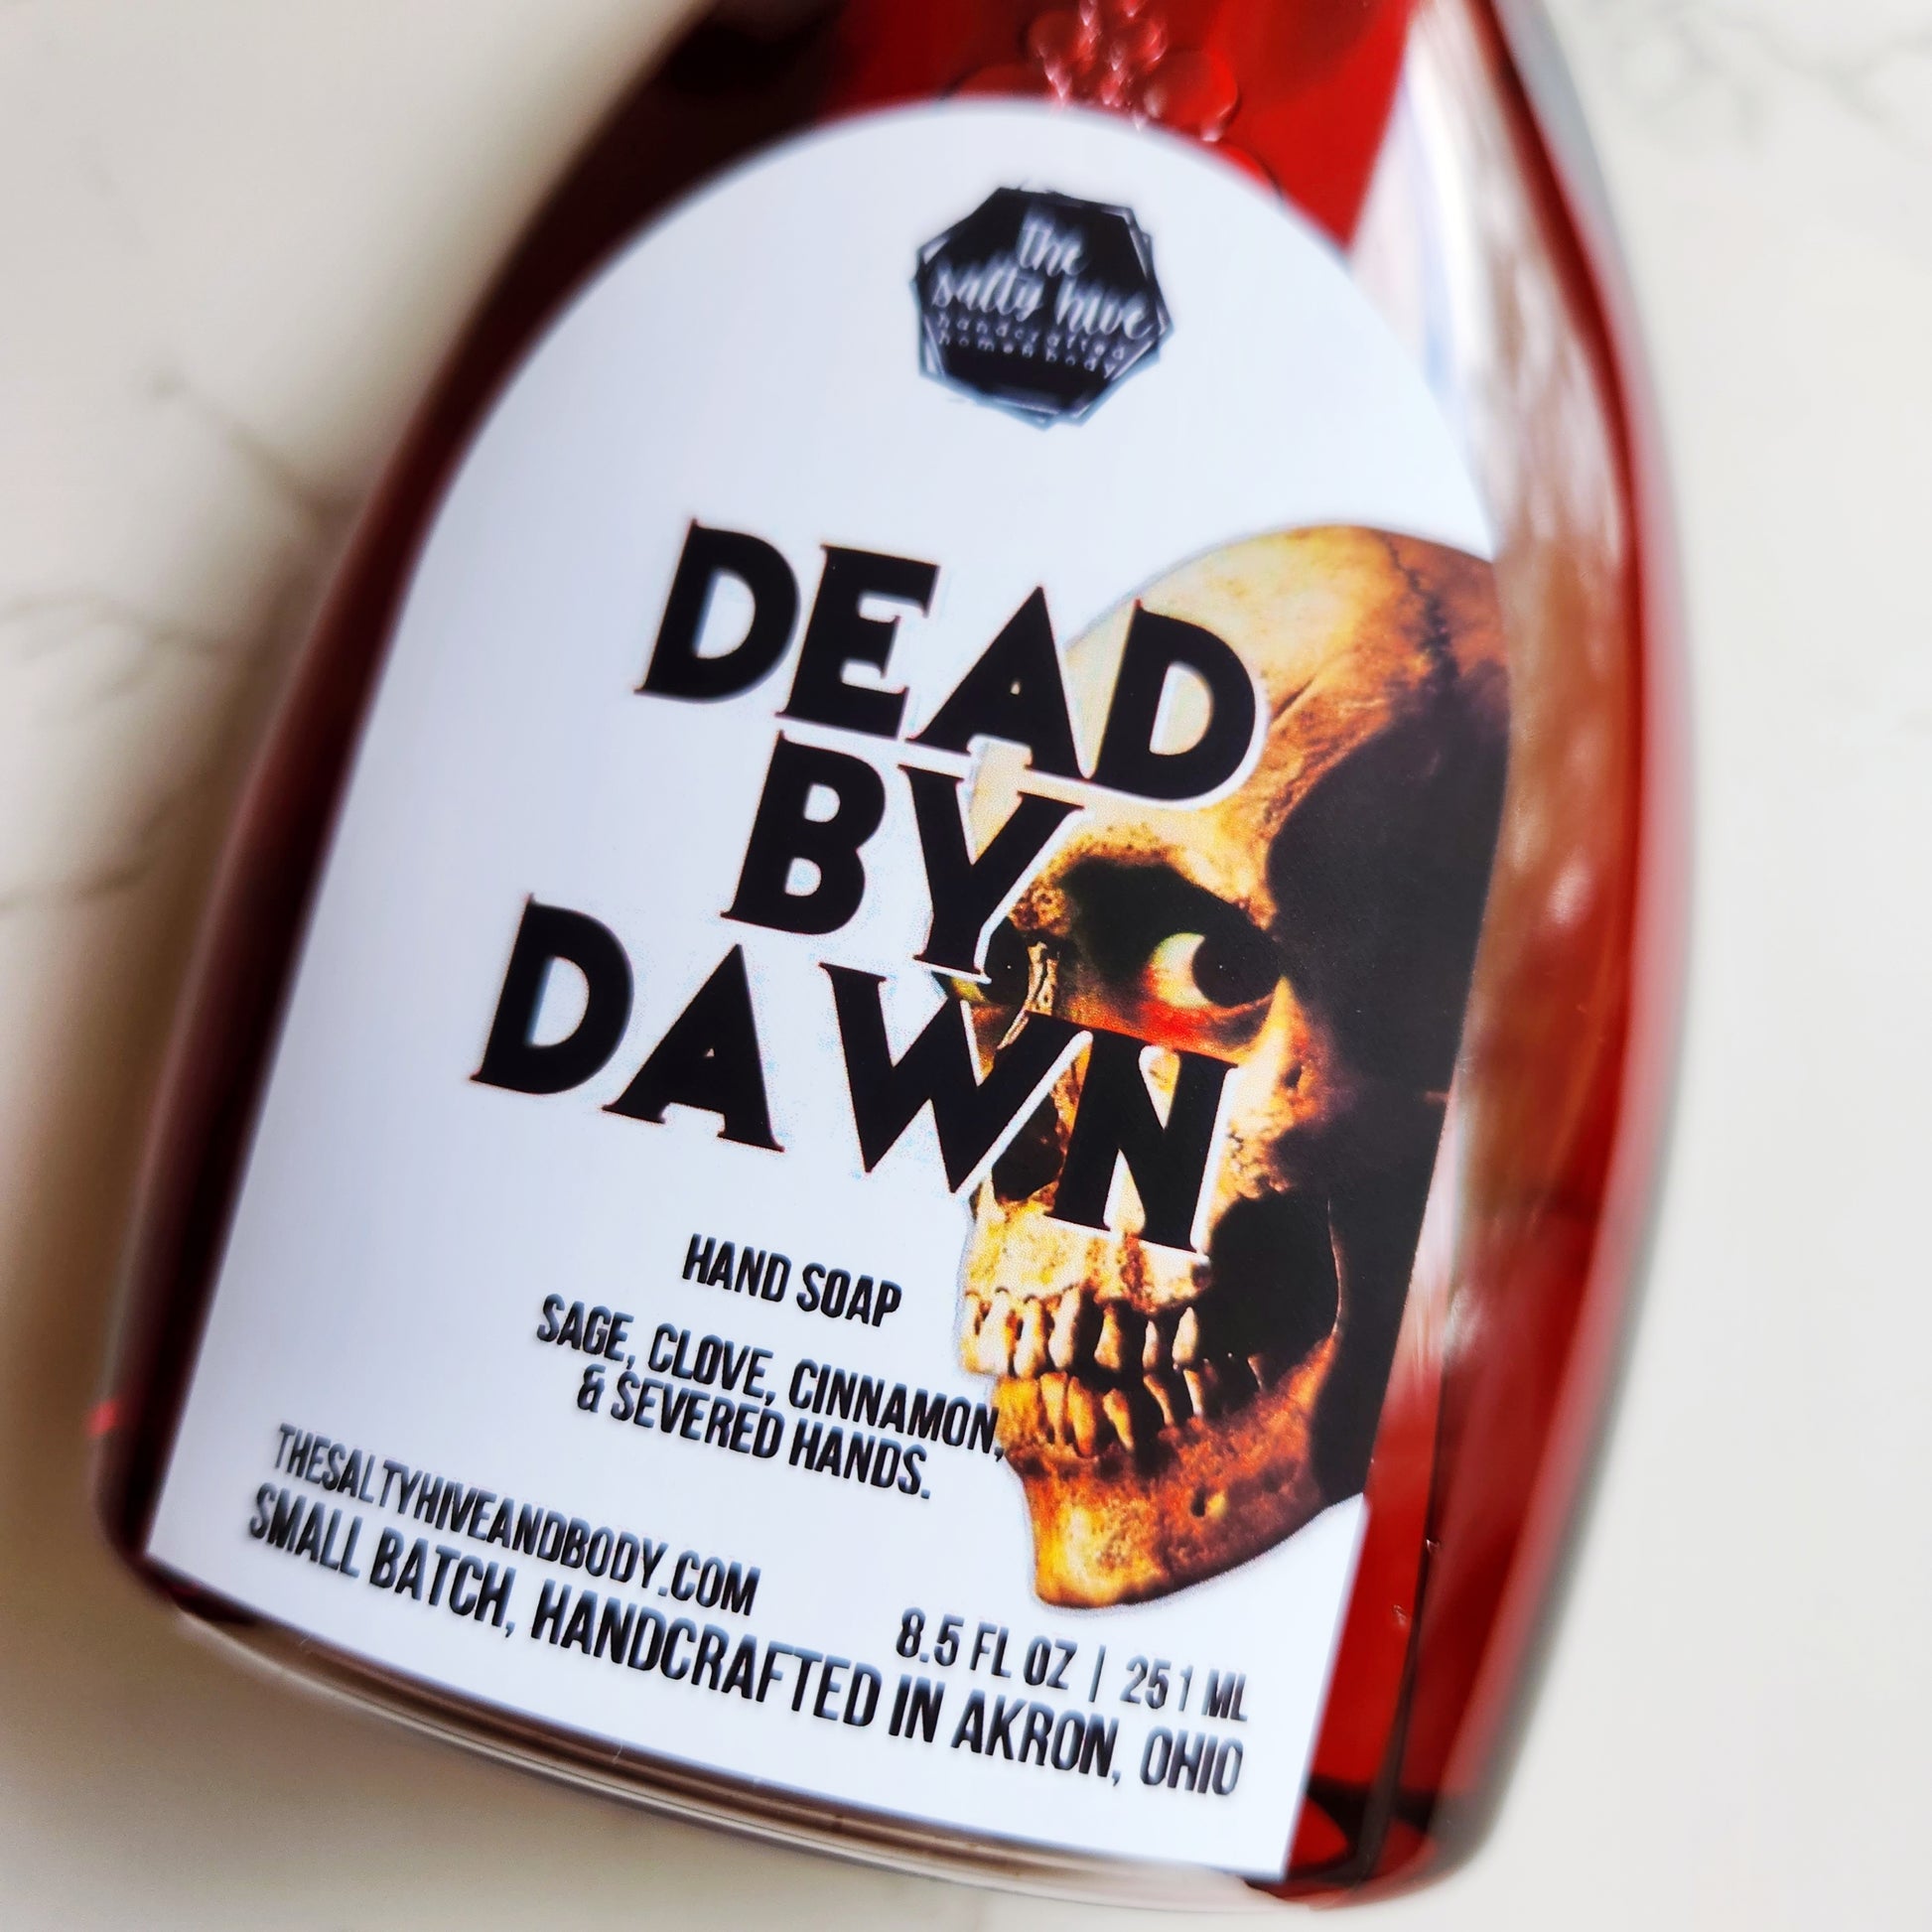 dead by dawn foaming hand soap - the salty hive